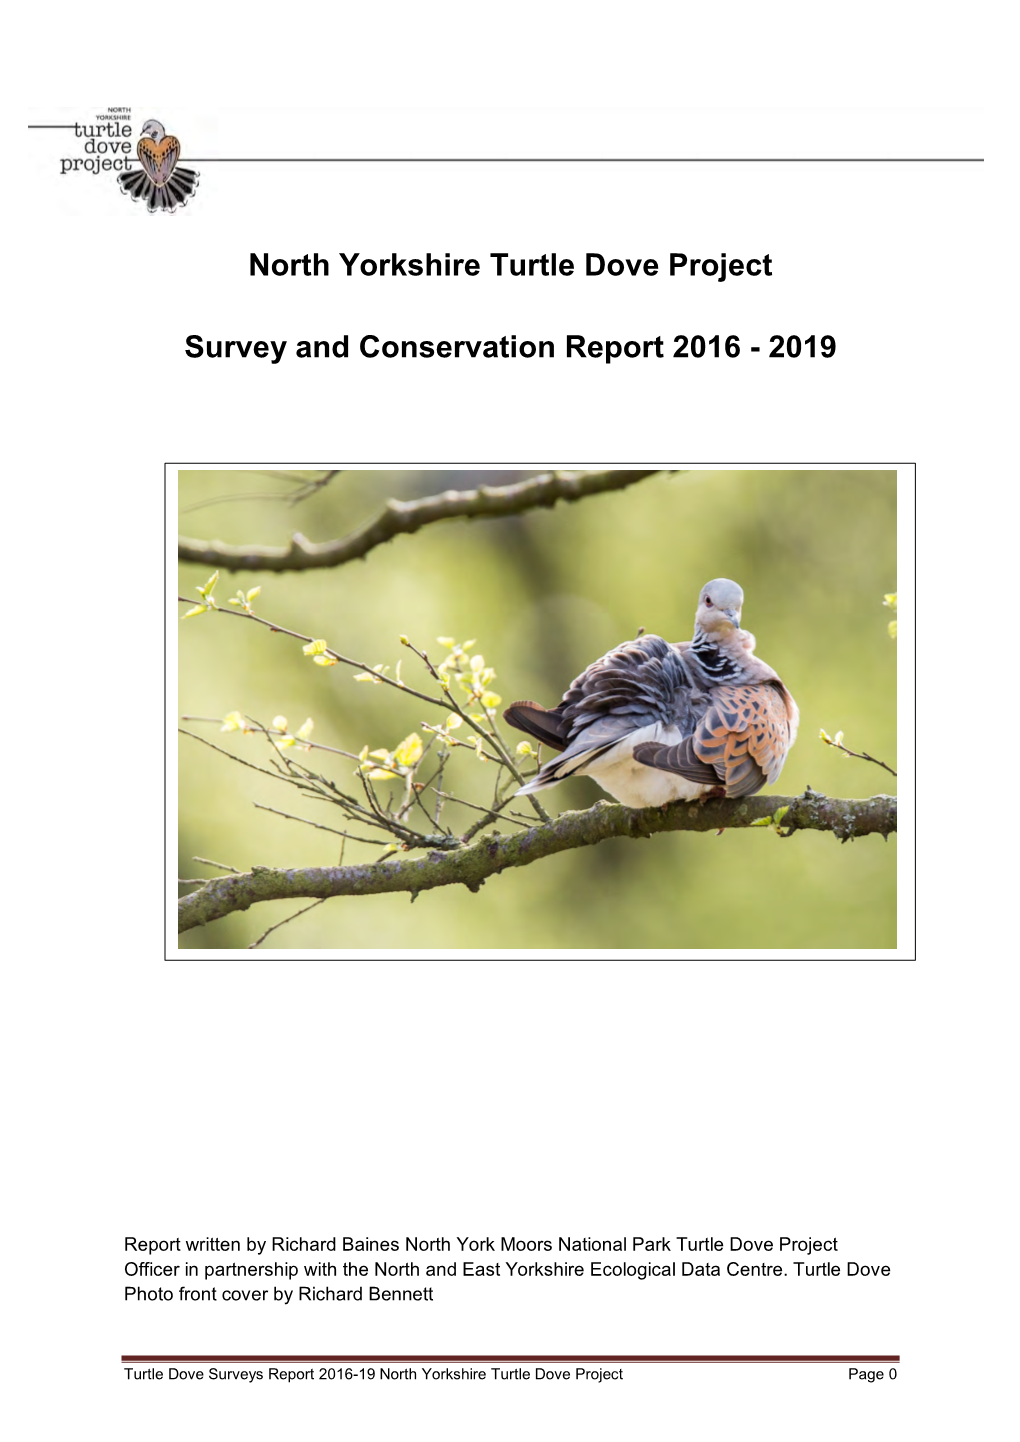 North Yorkshire Turtle Dove Project Survey and Conservation Report